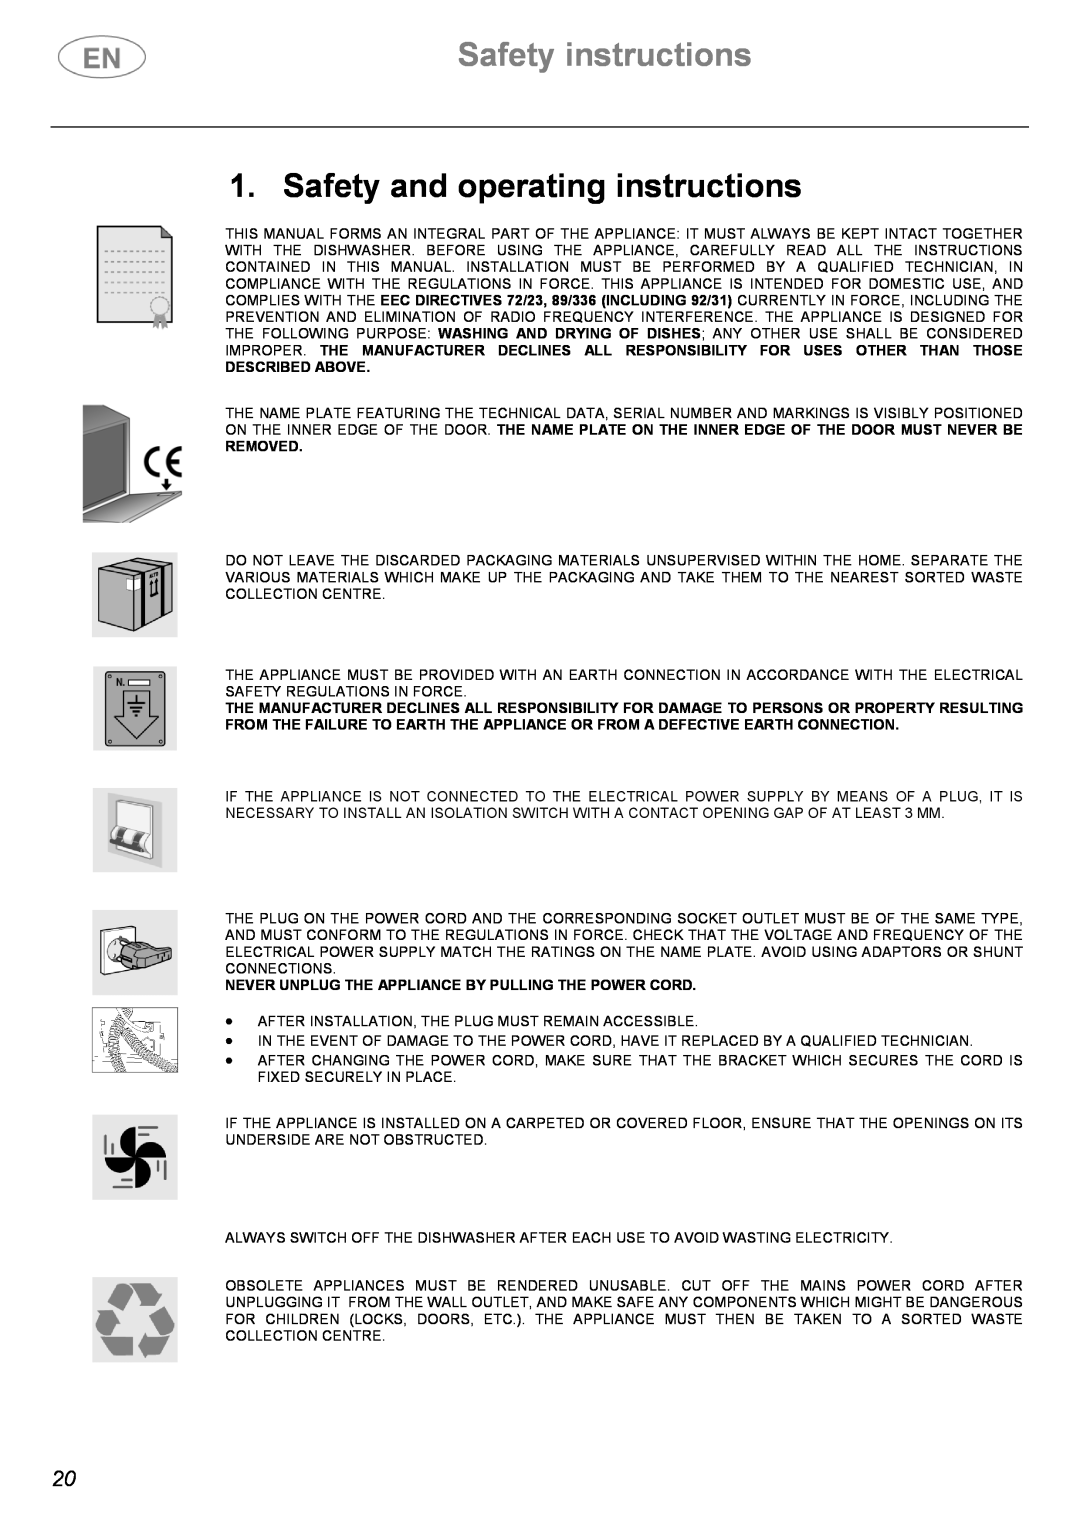 Smeg ST1108S instruction manual Safety instructions, Safety and operating instructions, Described Above, Removed 